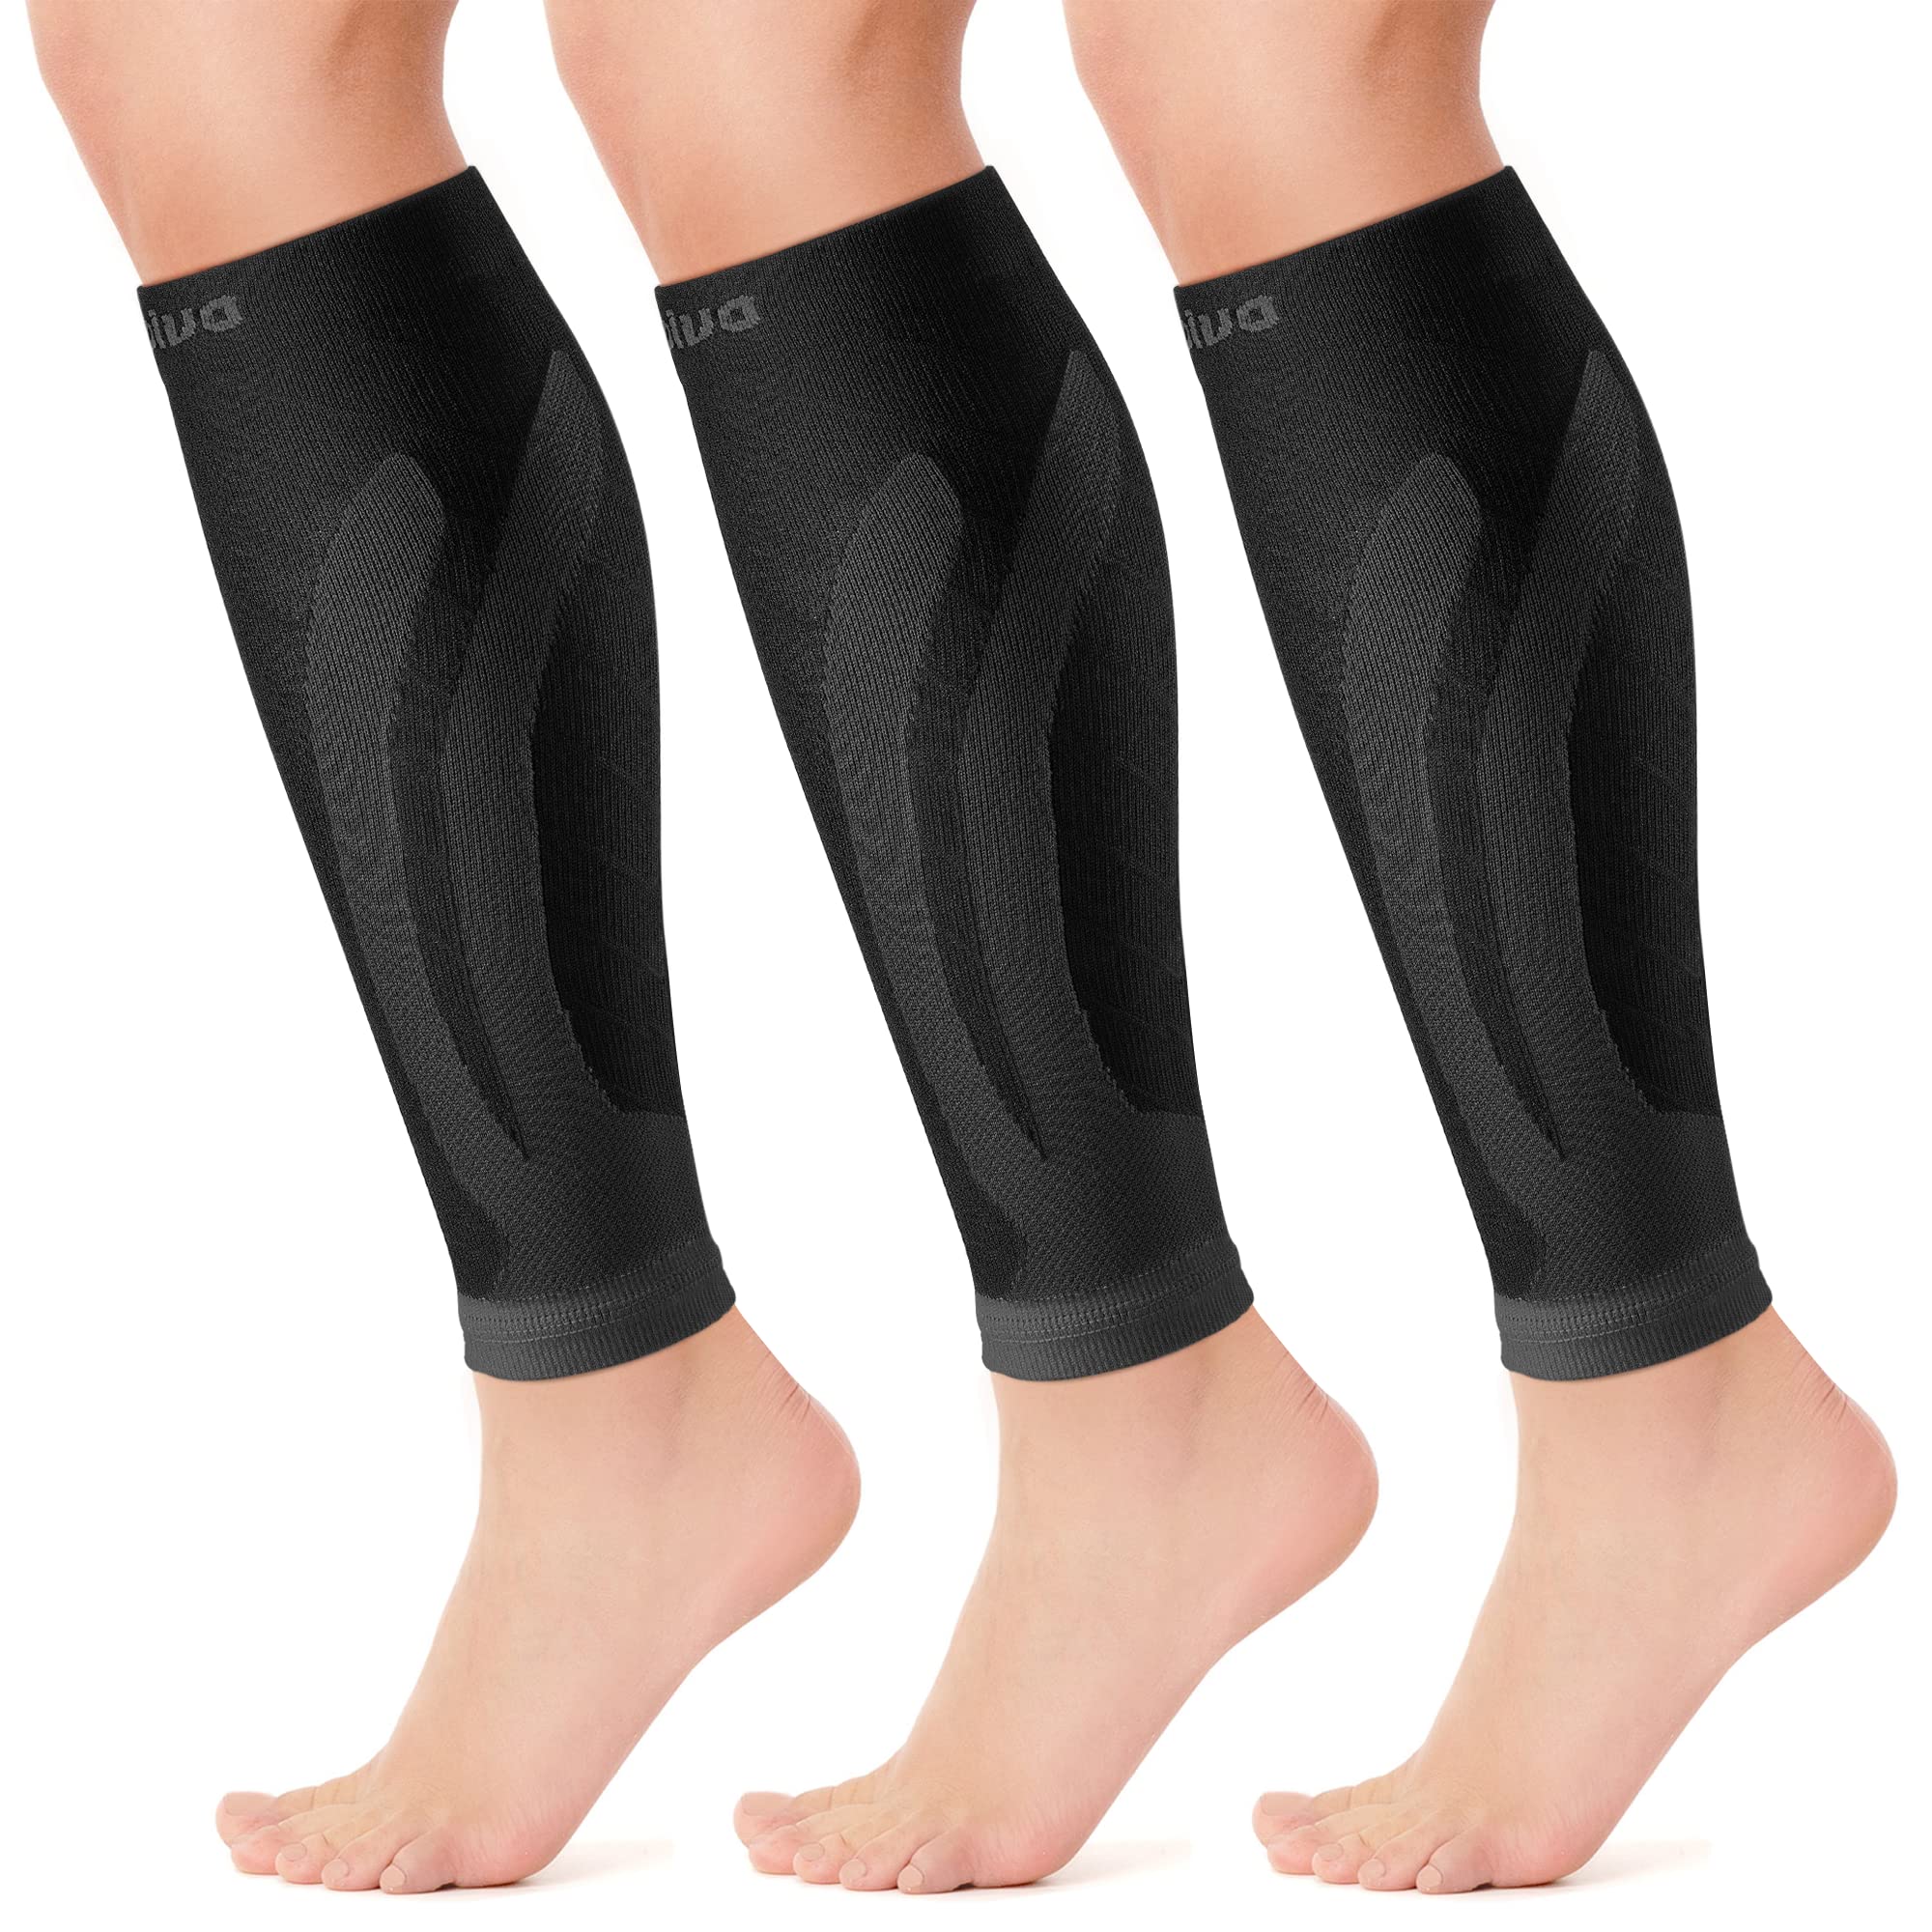 BeVisible Sports Calf Compression Sleeves - For Shin Splint & Calf Pain,  Graduated Compression Socks for Running & Recovery